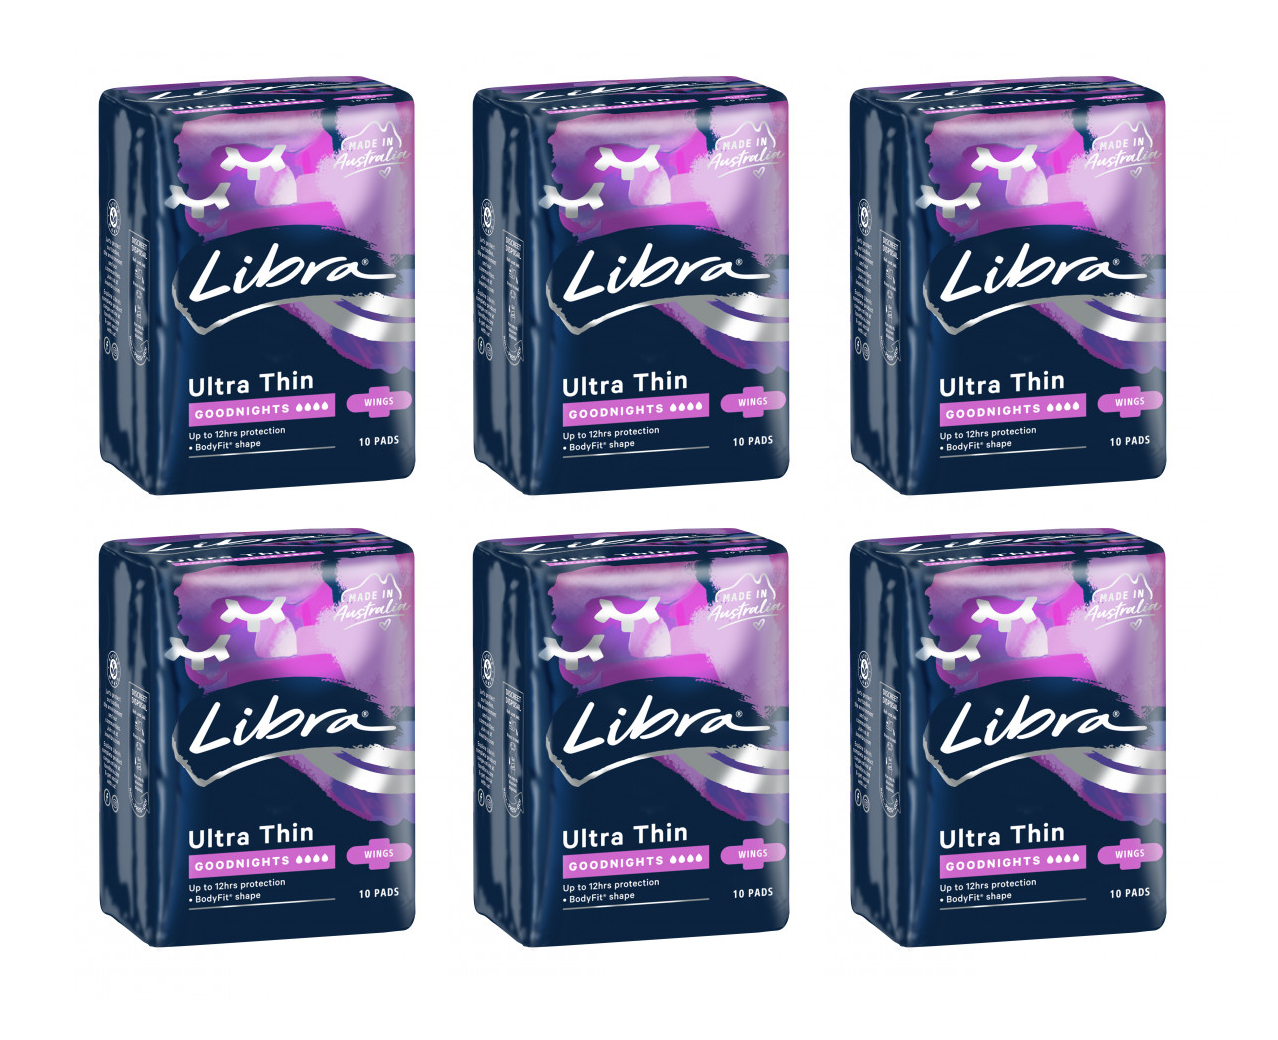 Libra Ultra Thin Pads Goodnights With Wings 10 Pack [Bulk Buy 6 Units]